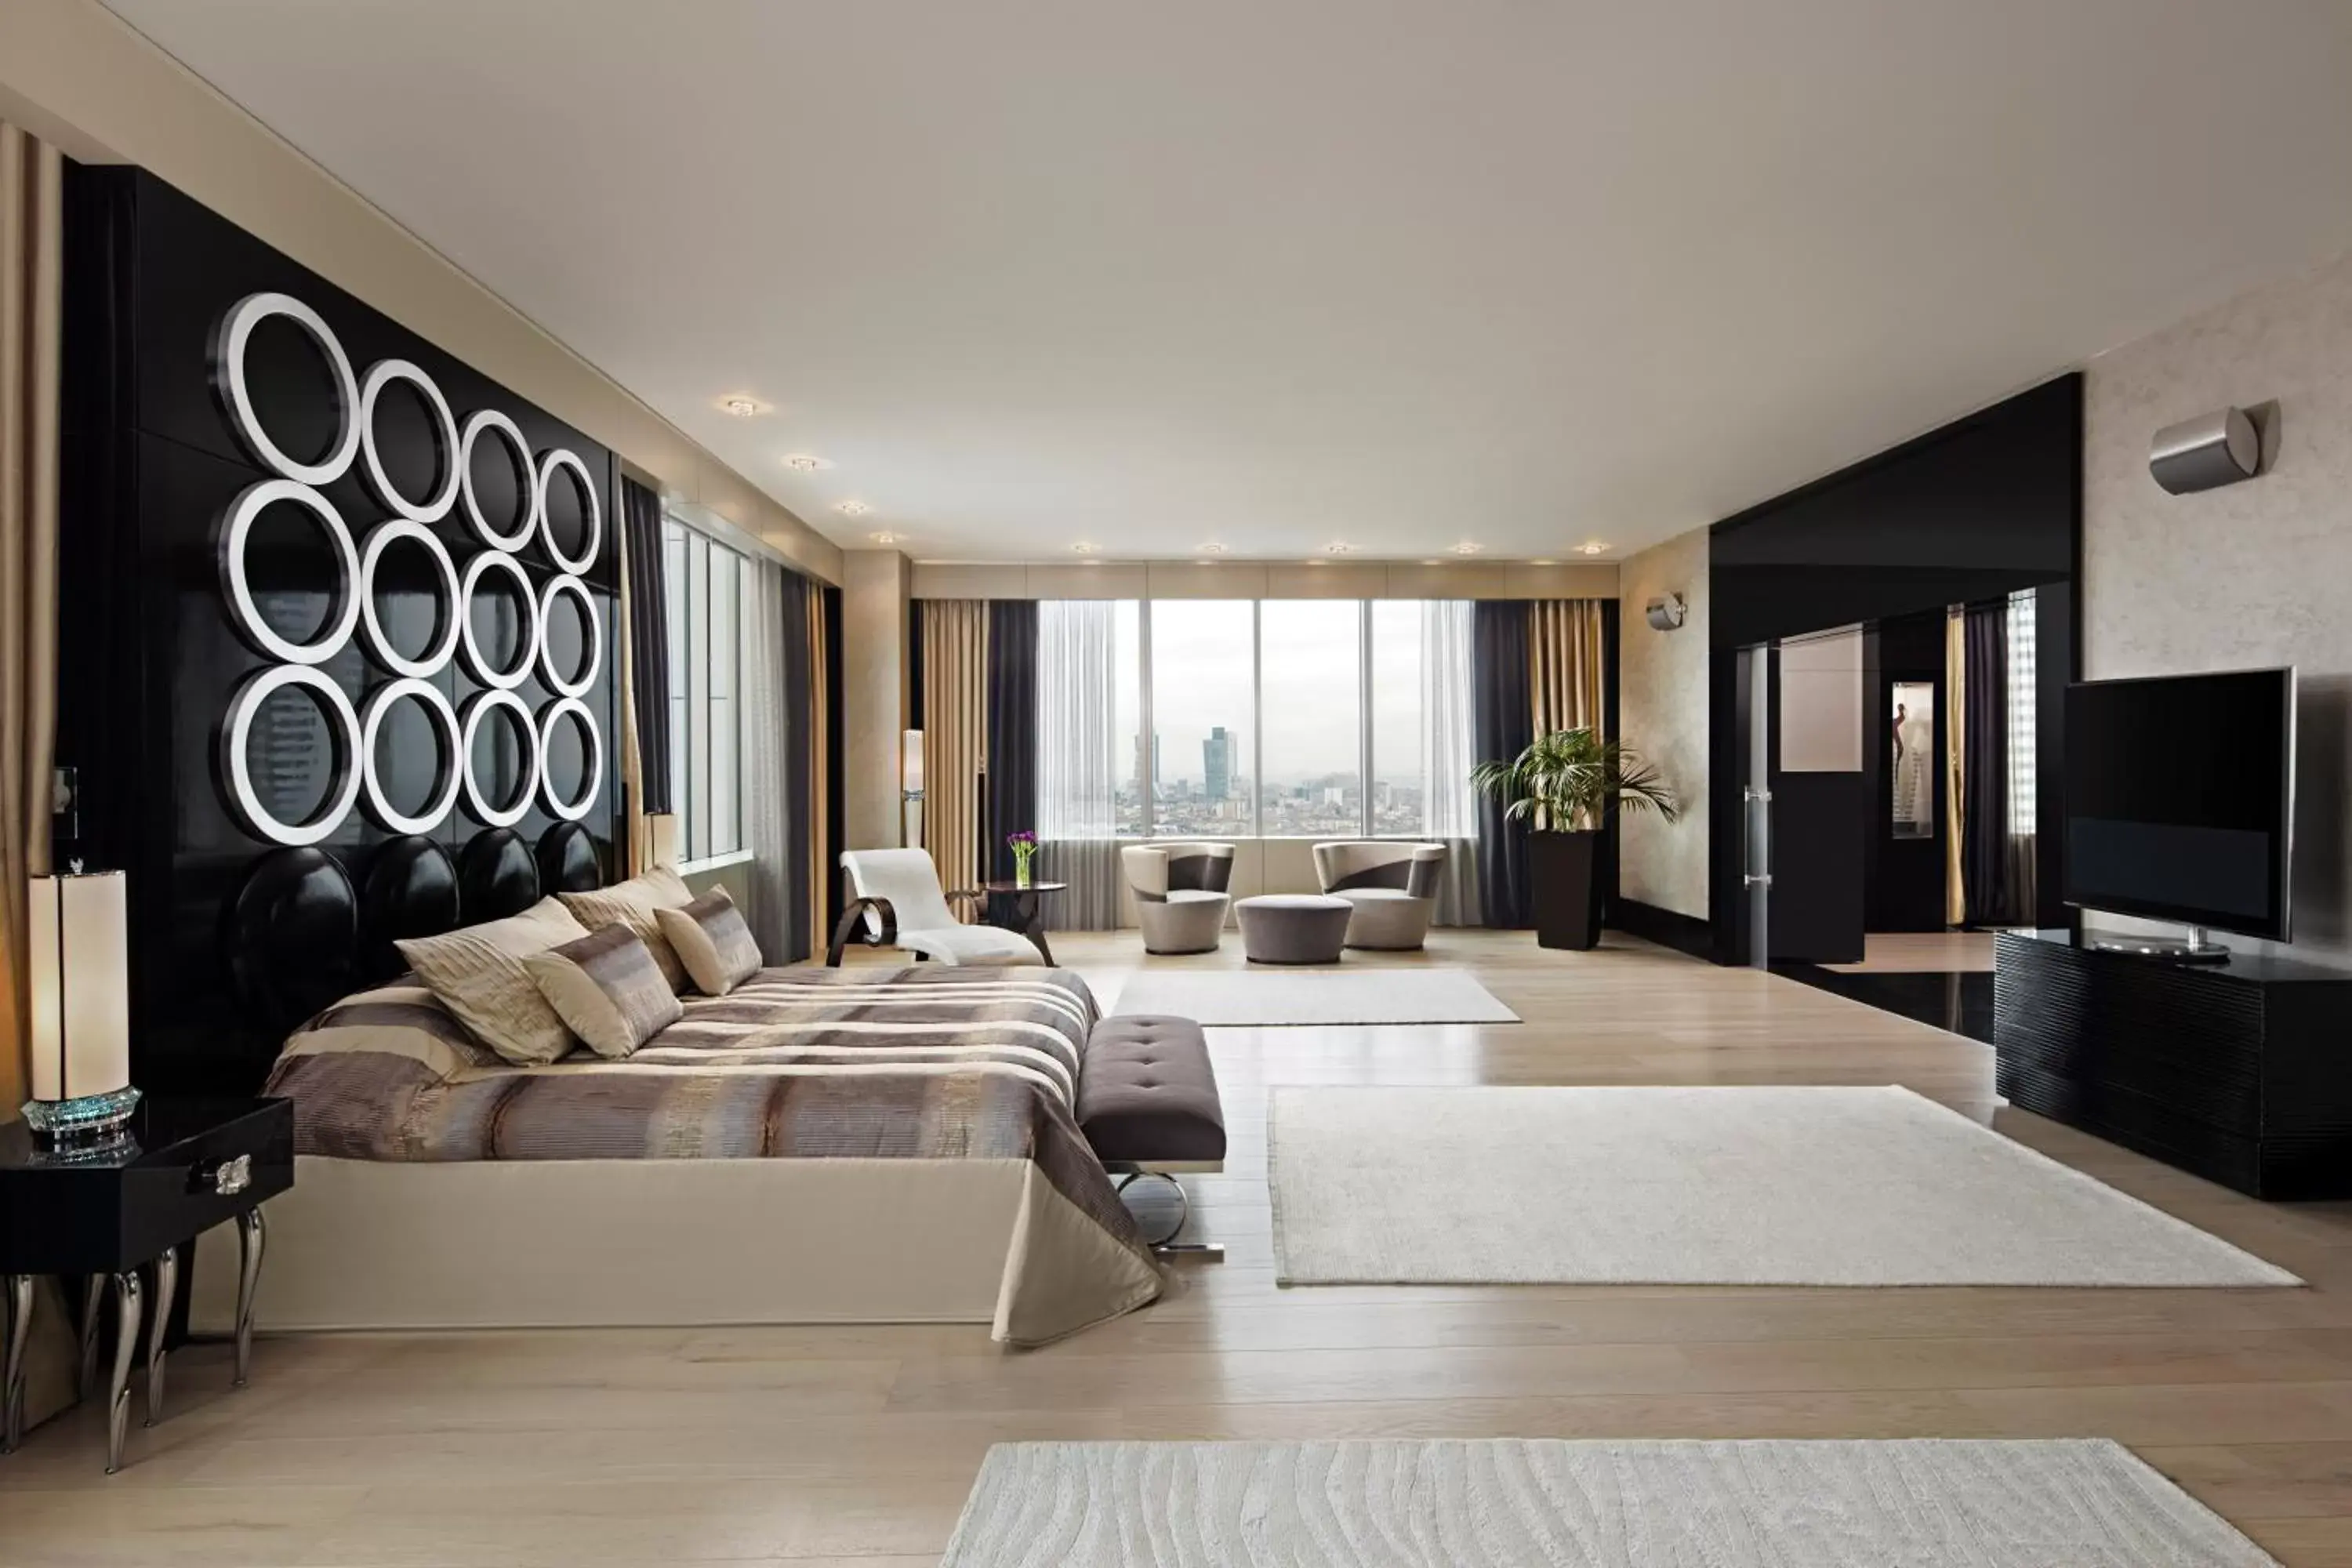 Penthouse Suite in Hyatt Centric Levent Istanbul